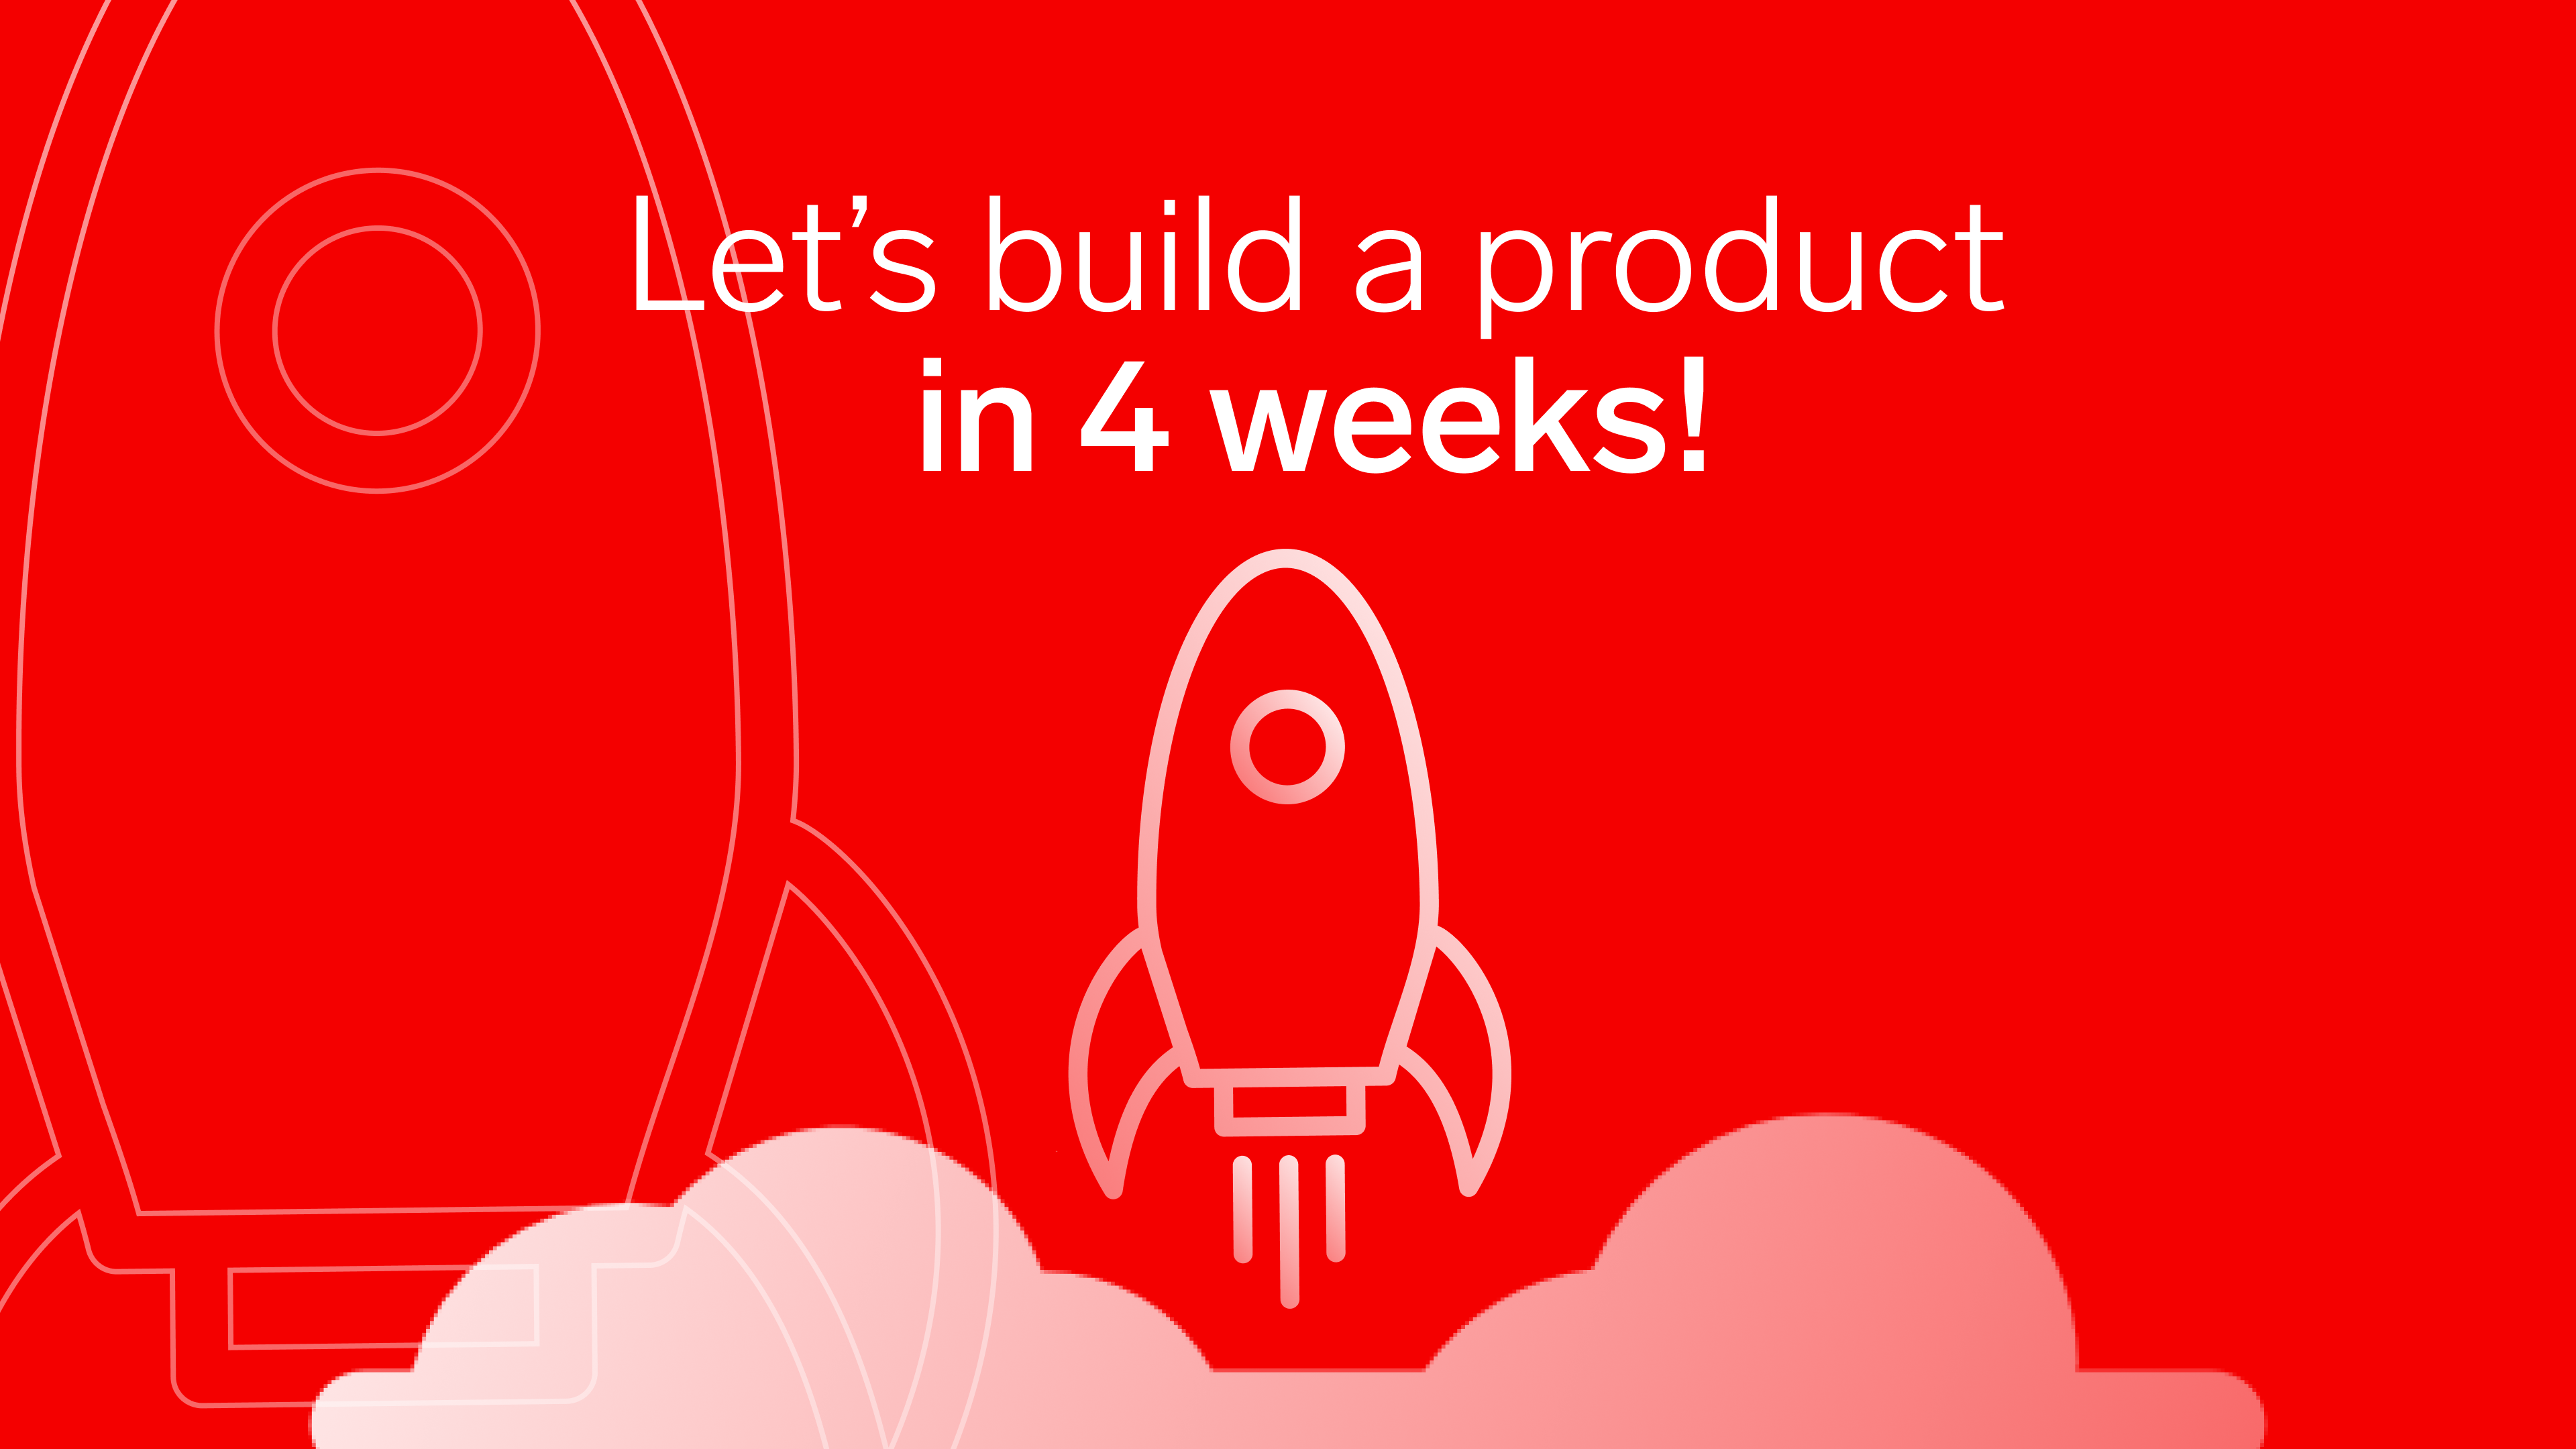 Let's build a product in 4 weeks!